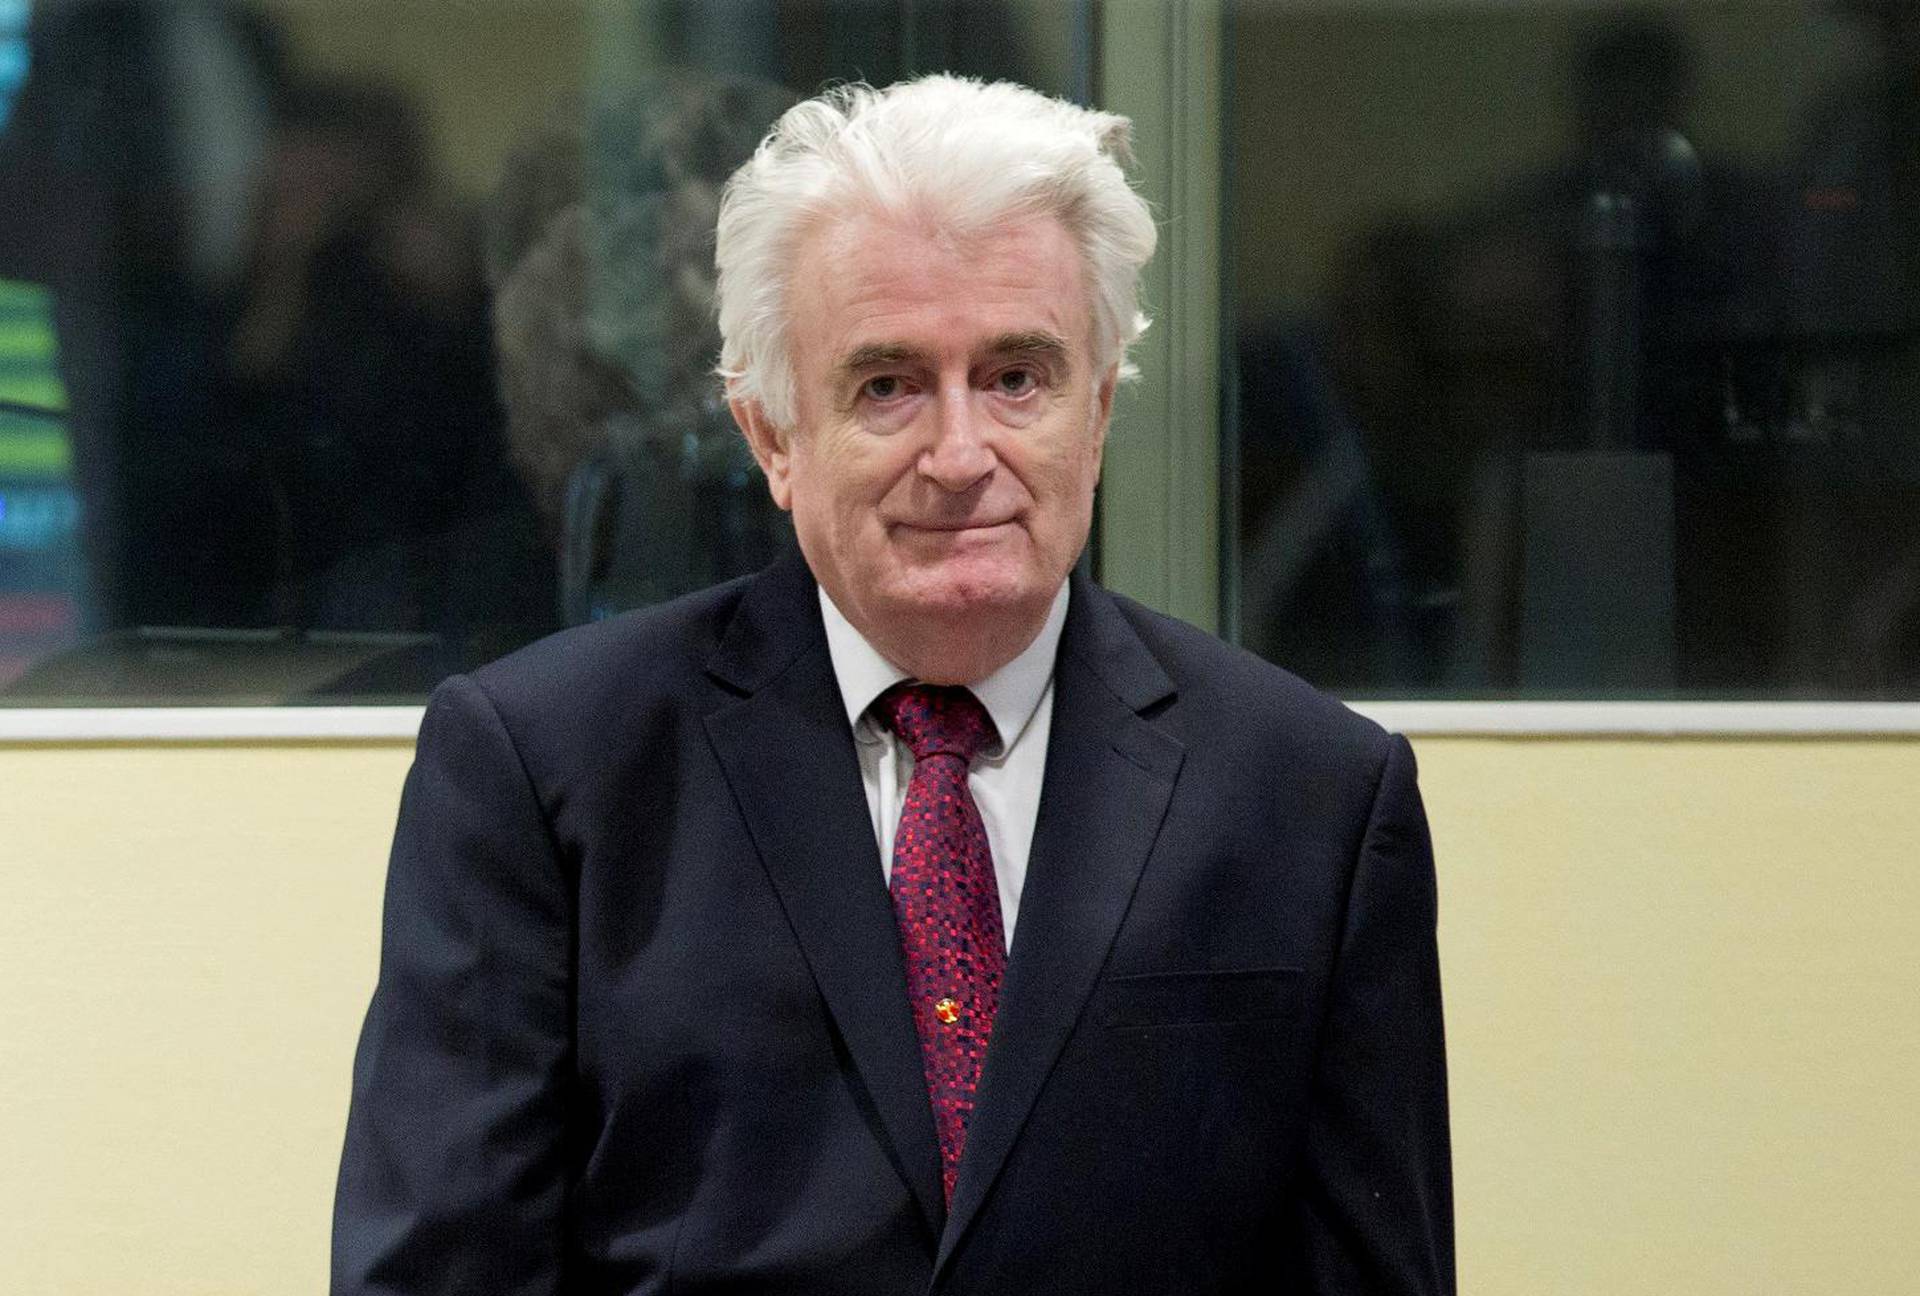 Former Bosnian Serb leader Radovan Karadzic appears before the Appeals Chamber of the International Residual Mechanism for Criminal Tribunals ("Mechanism") ruling on a appeal of his 40 year sentence for war crimes in The Hague